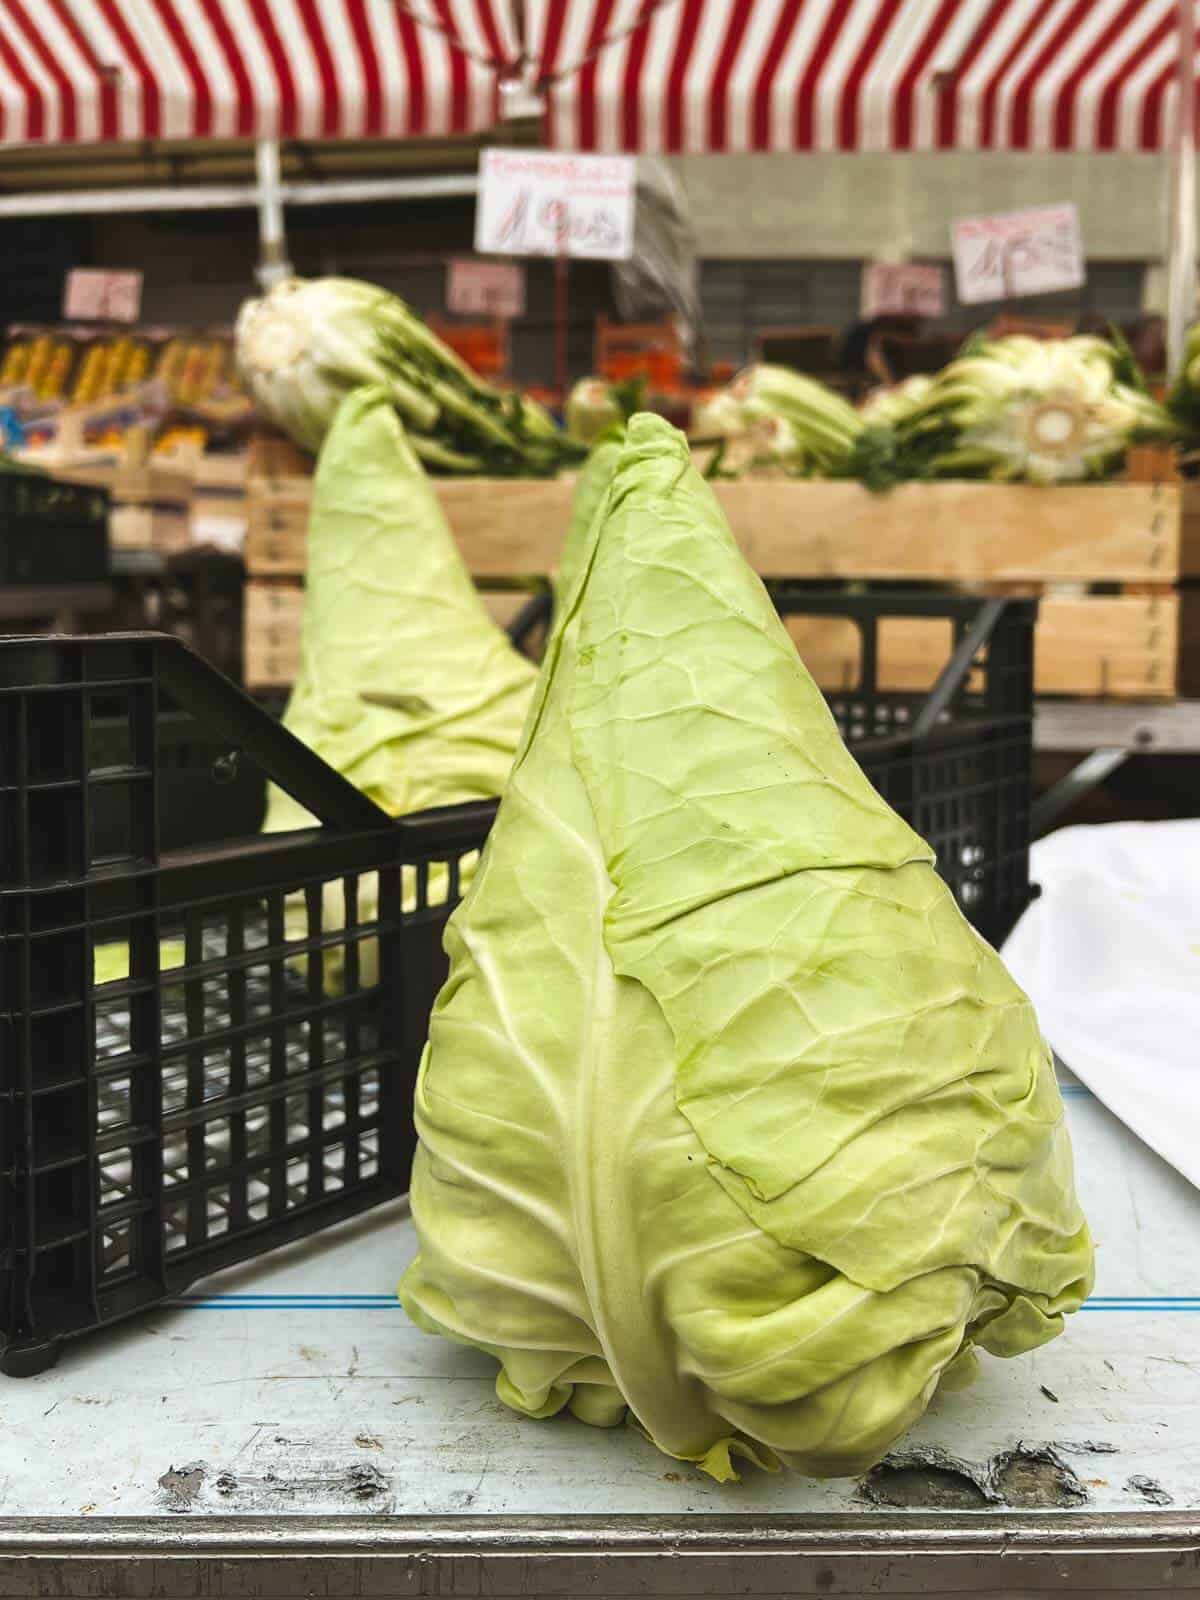 cone shaped cabbage in farmers market